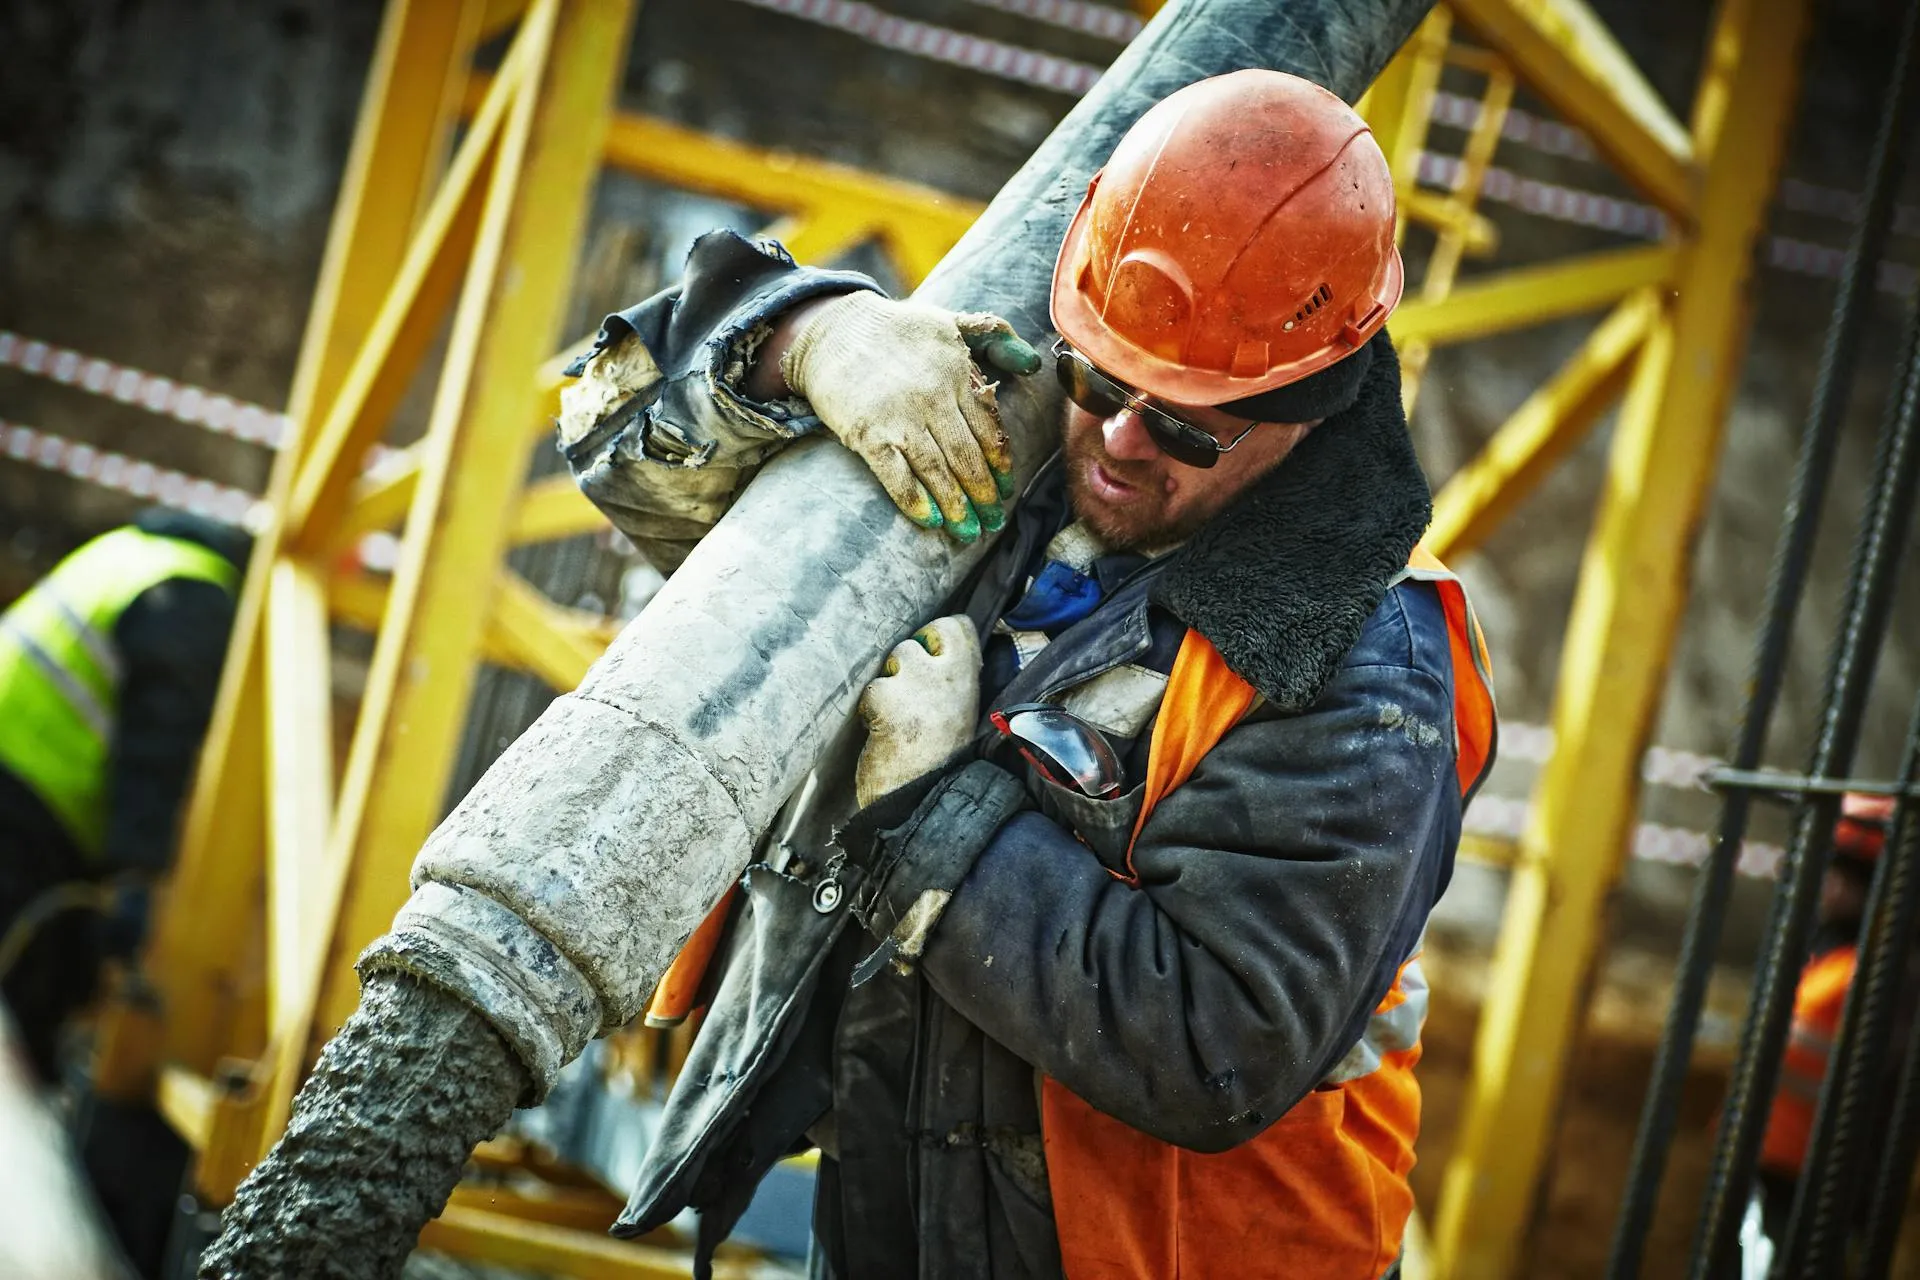 Hard-working construction worker carries hefty concrete pipe at site.